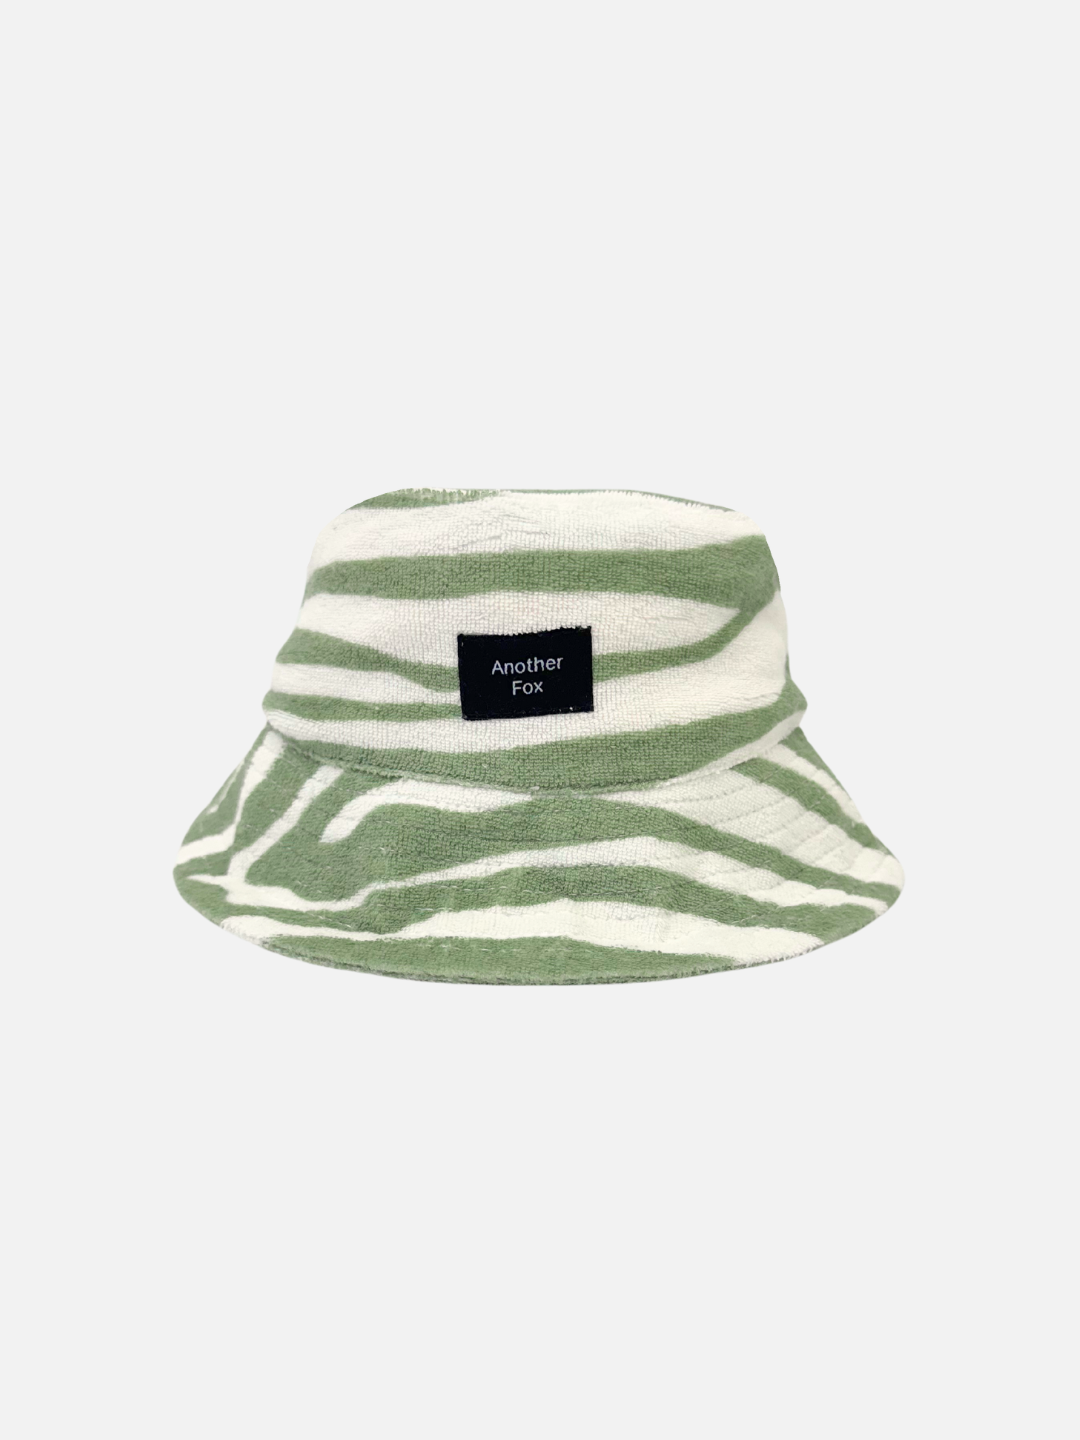 A front view of the terry cloth hat. Zebra print in green.